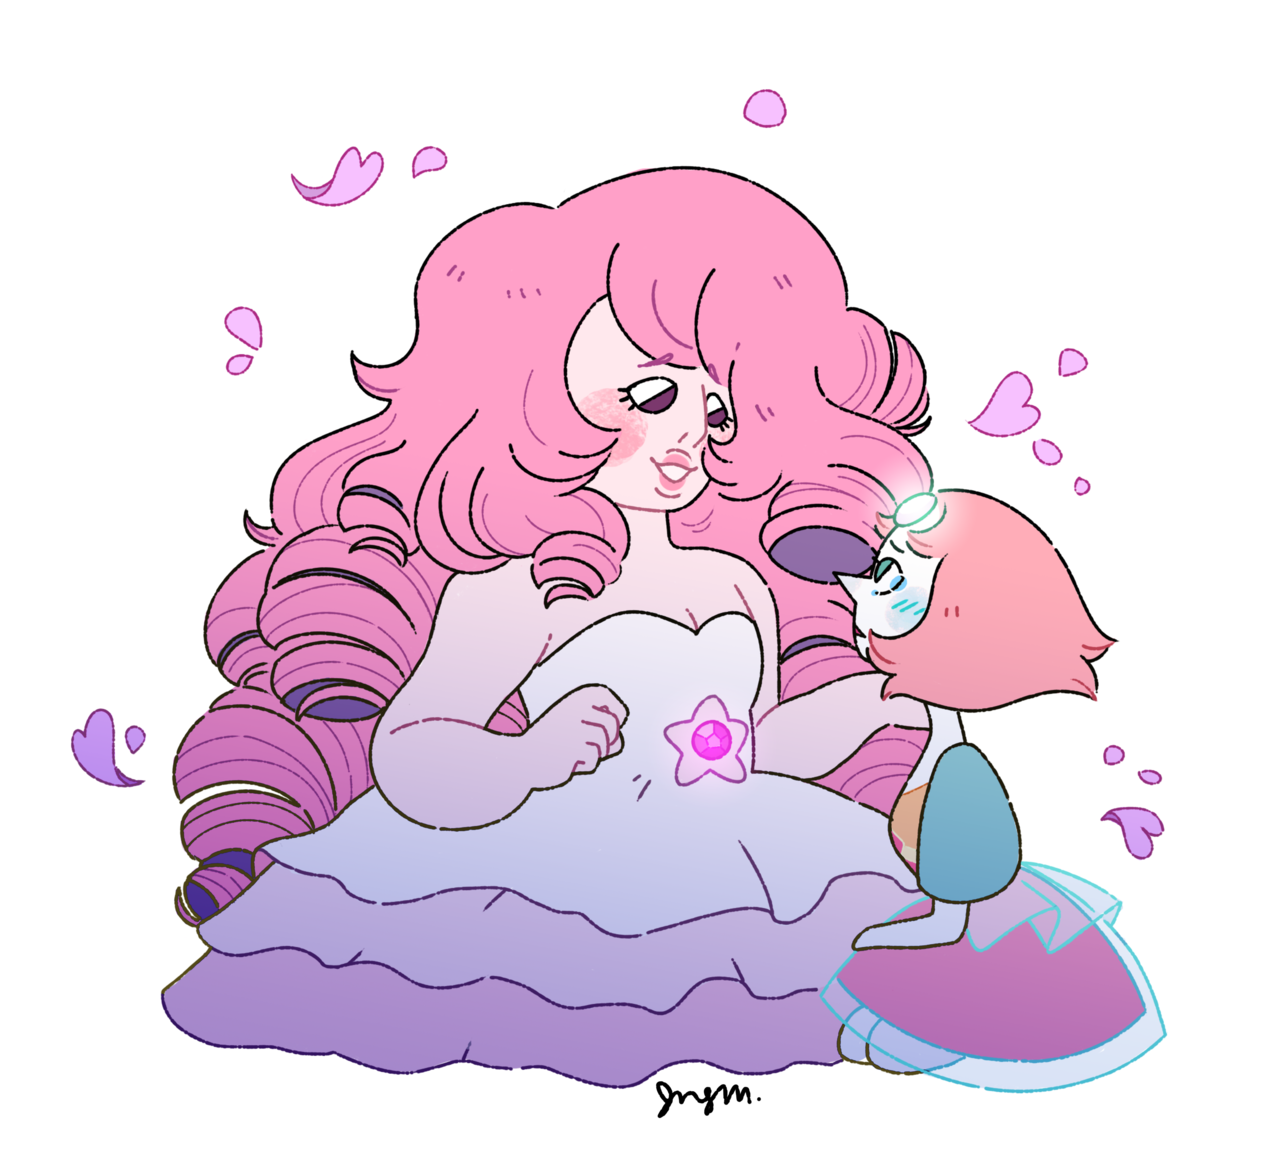 She did love her pearl. She really did. I maaaaay have kind of borrowed @luminarywitch‘s og pink pearl’s design a bit. It’s real cute I love it so much!! Check it out:...